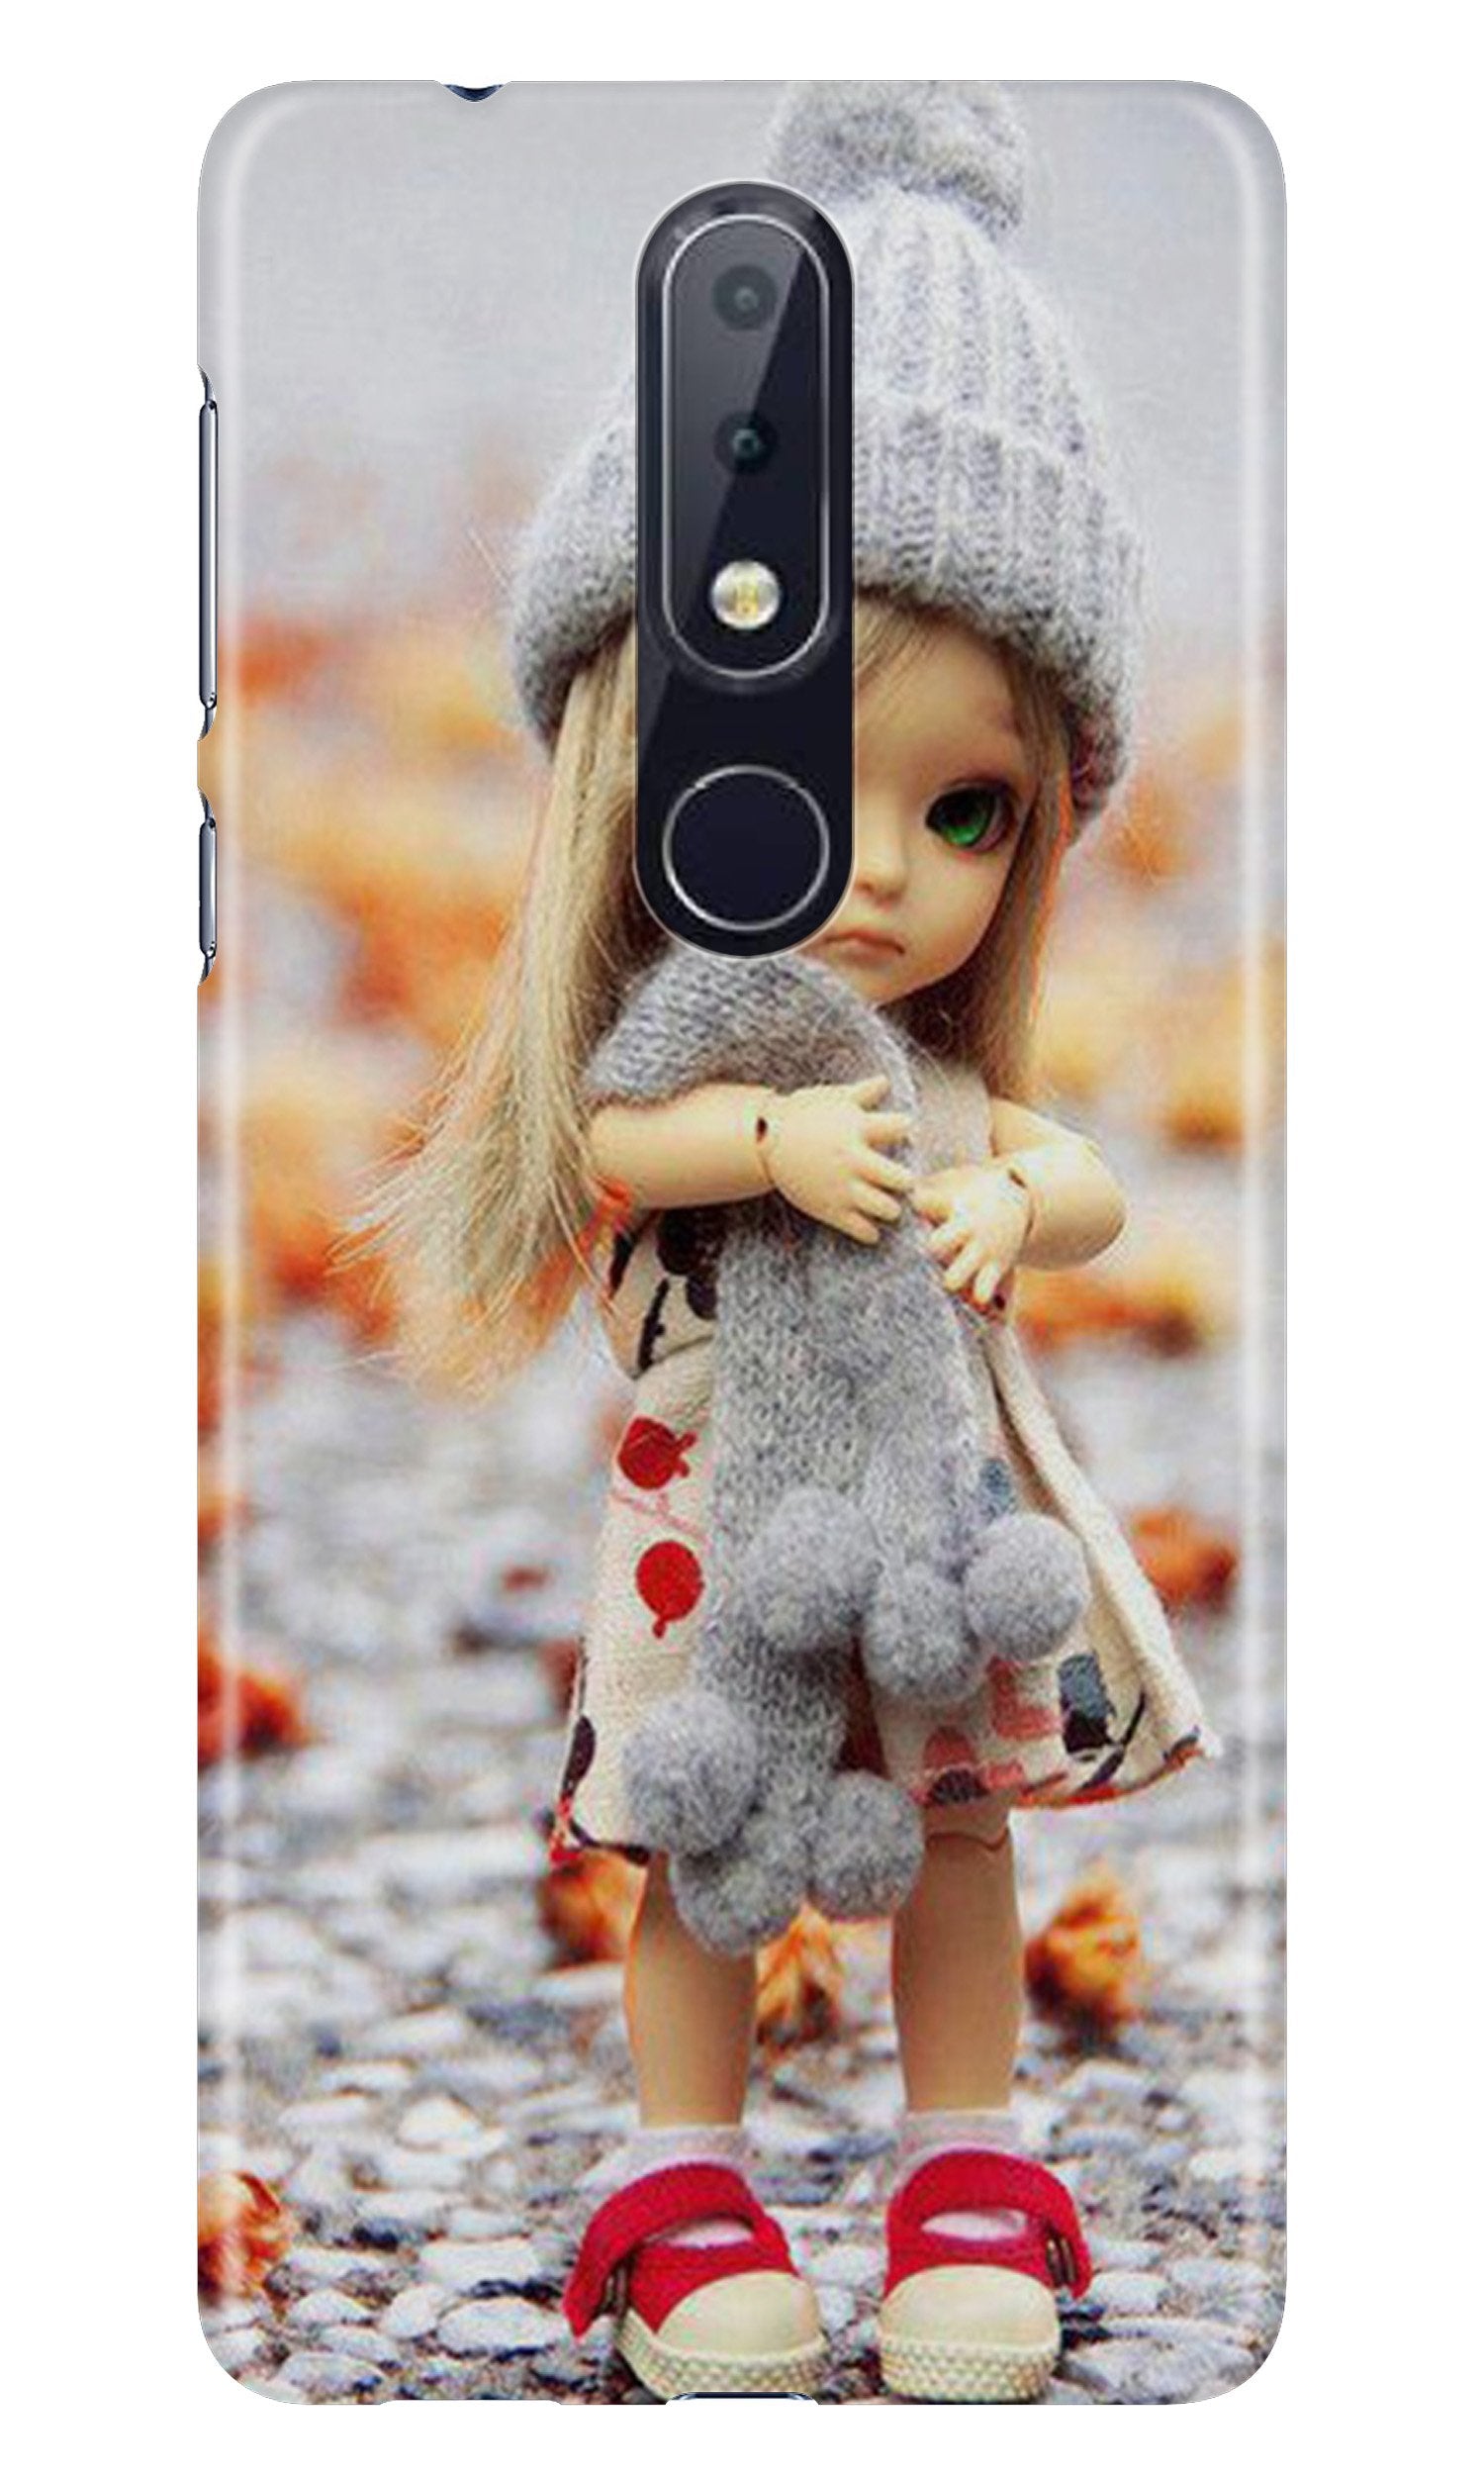 Cute Doll Case for Nokia 3.2